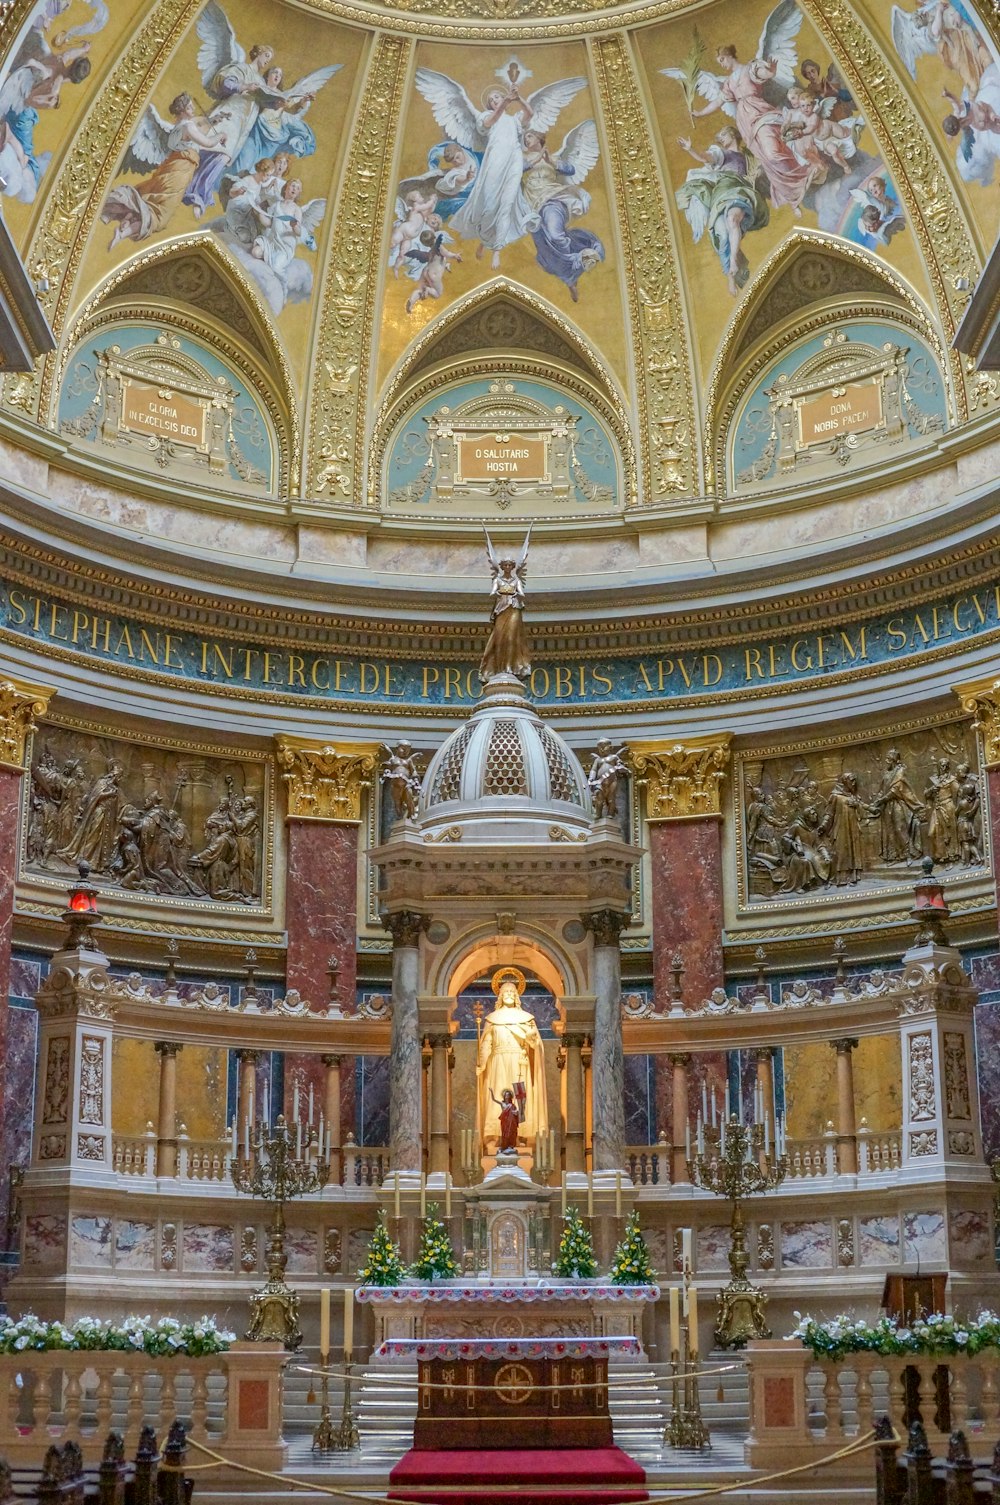 the interior of a church with a statue in the center